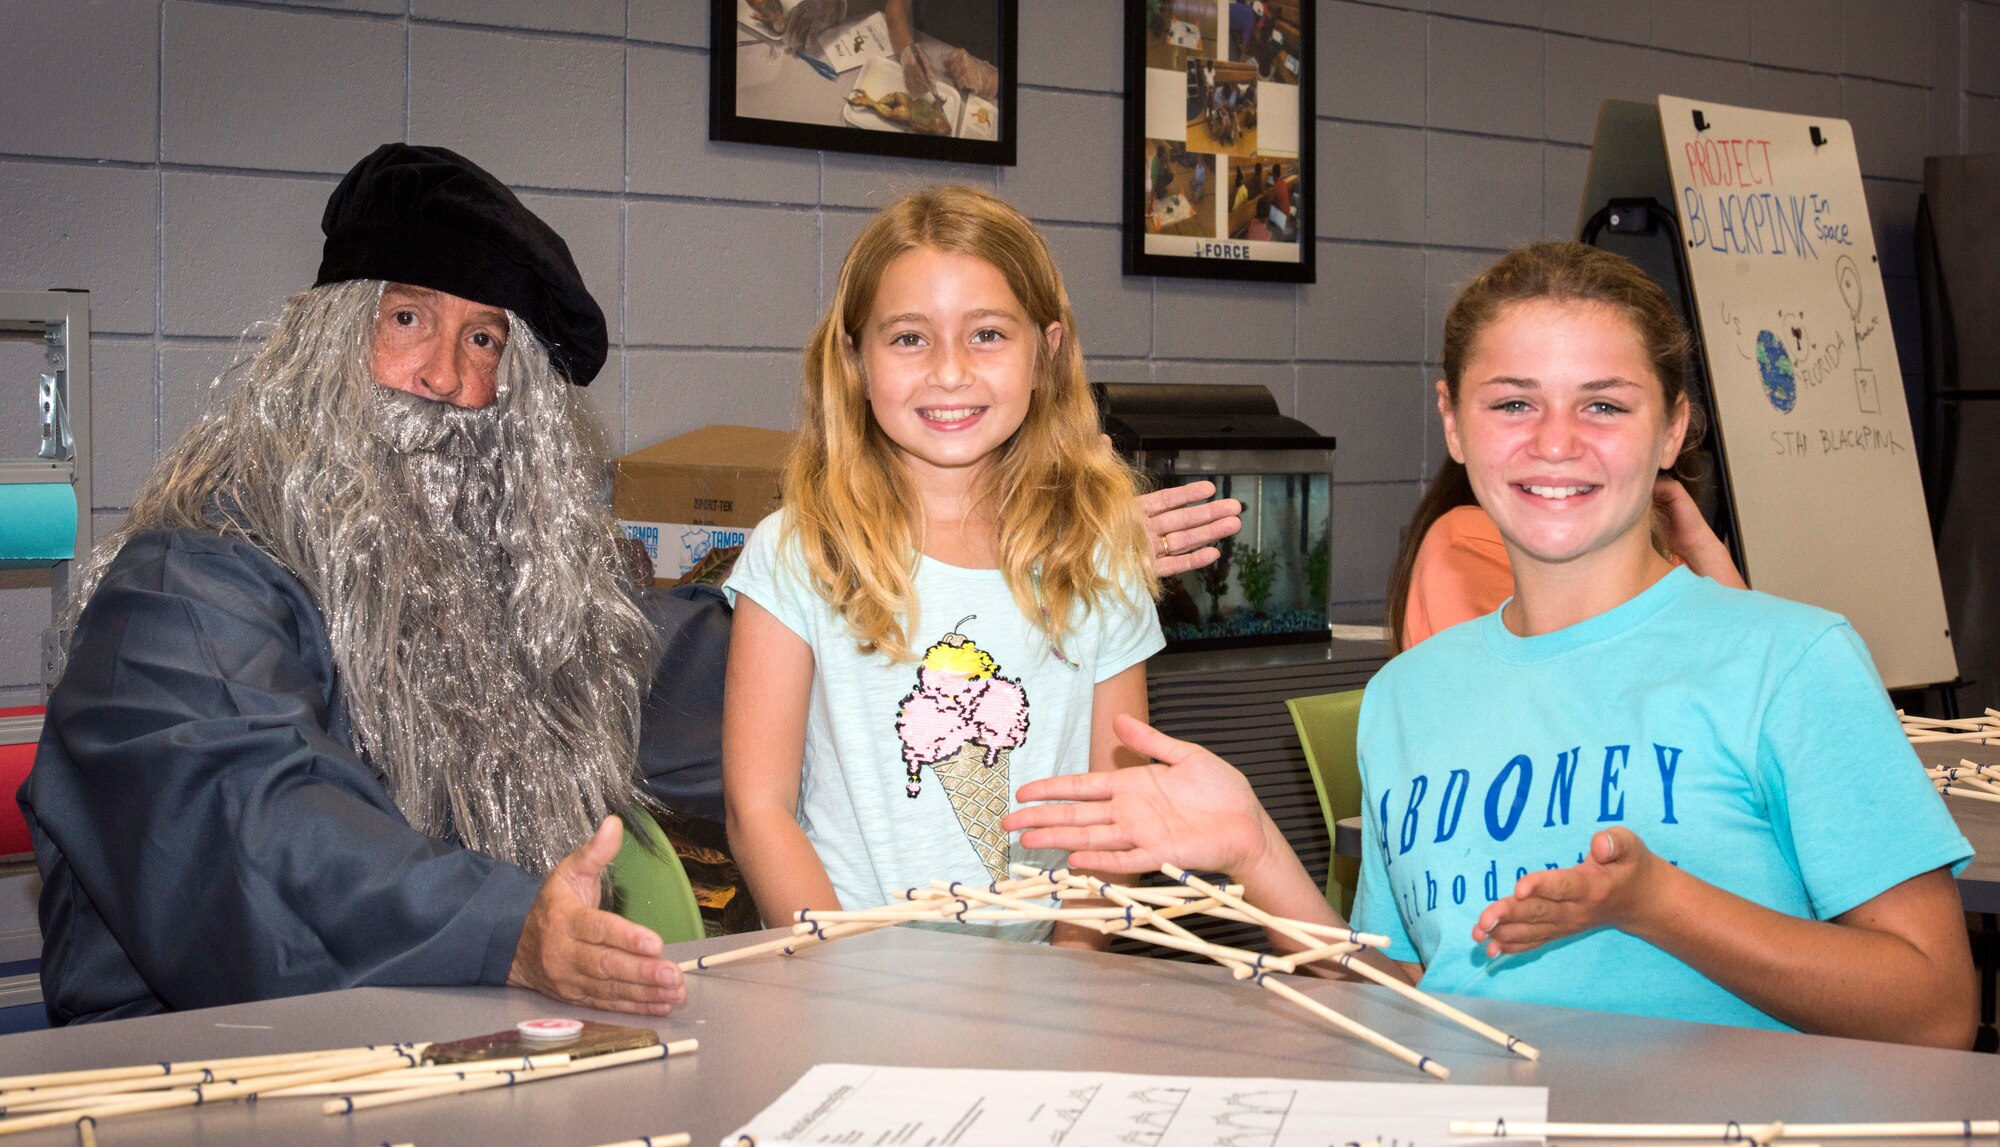 A Leonardo Da Vinci re-enactor visits the 6th Force Support Squadron Child Development Center students to build Da Vinci self-supporting bridges during a science, technology, engineering and mathematics camp at MacDill Air Force Base, Fla., June 11, 2019.